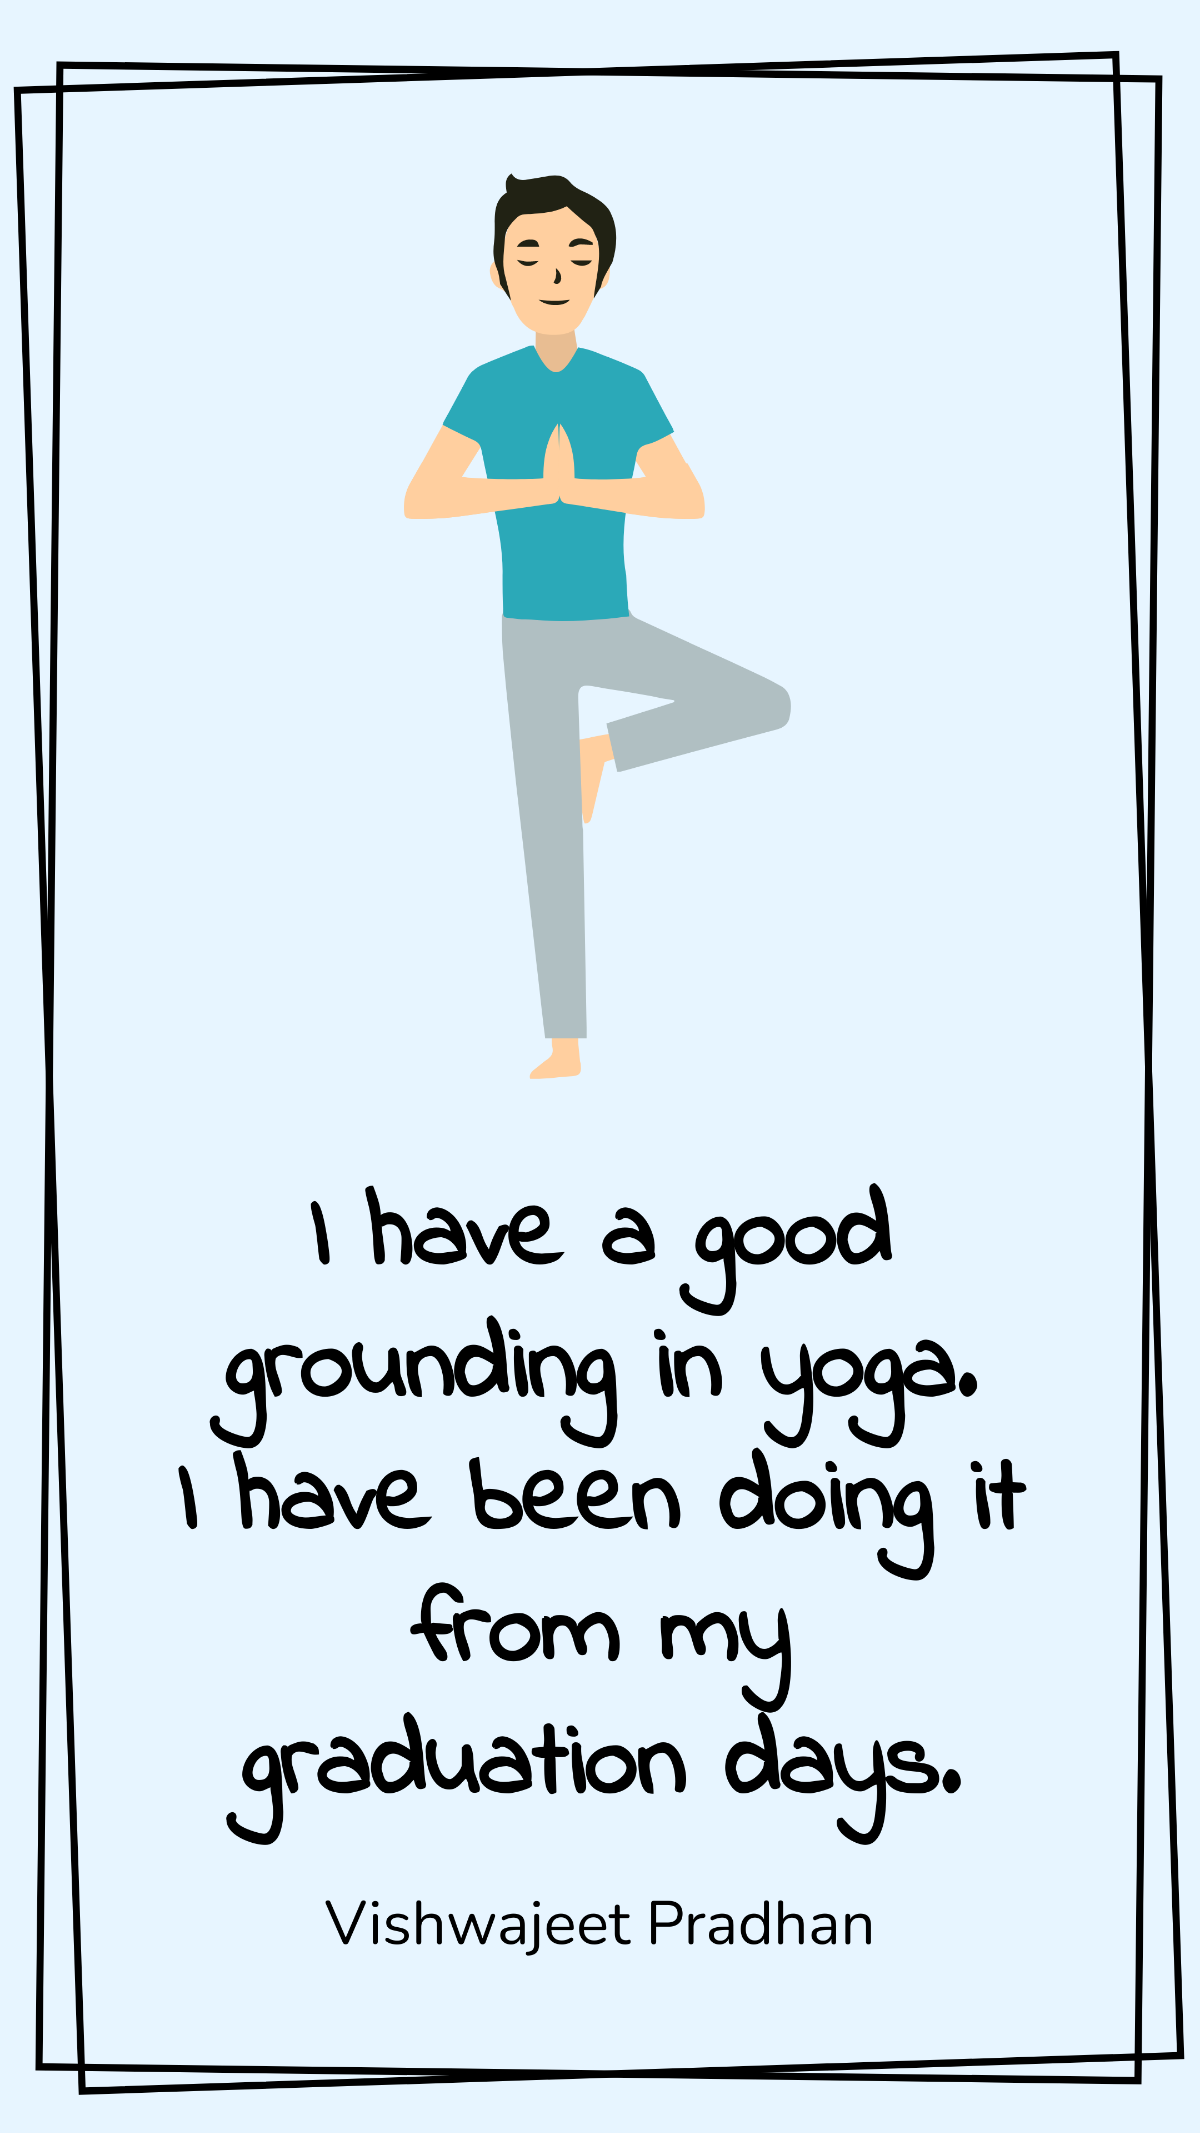 Vishwajeet Pradhan - I have a good grounding in yoga. I have been doing it from my graduation days. Template